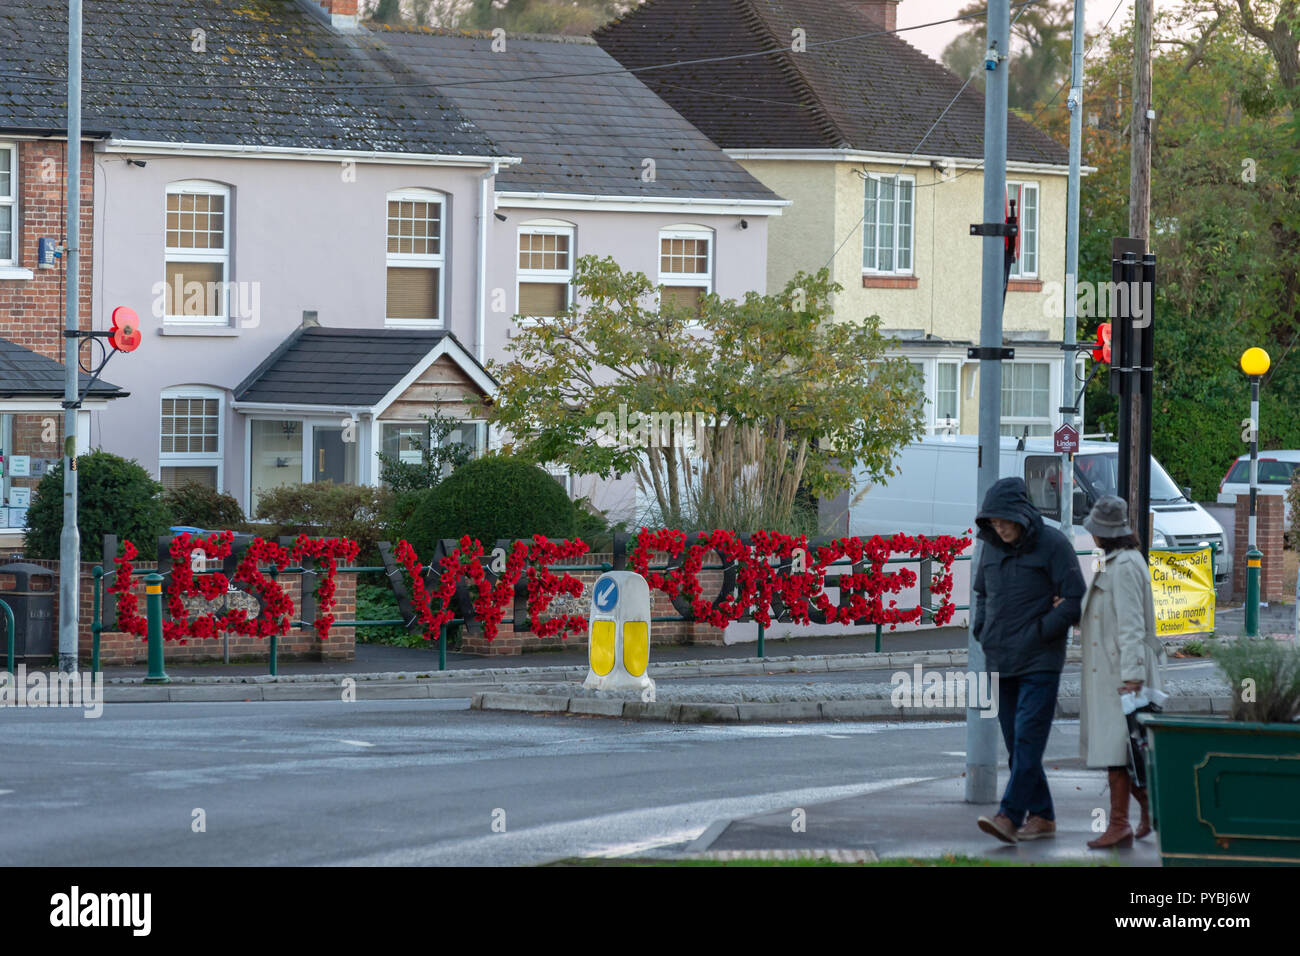 Amesbury, Wiltshire, UK. 26th Oct 2018. A floral poppy tribute by the local branch of British Legion has appeared on a roundabout in the centre of Amesbury, Wiltshire, the floral tribute spells out the words Lest We Forget. WW1 100 Years. Credit: Mark Clemas Photography/Alamy Live News Stock Photo